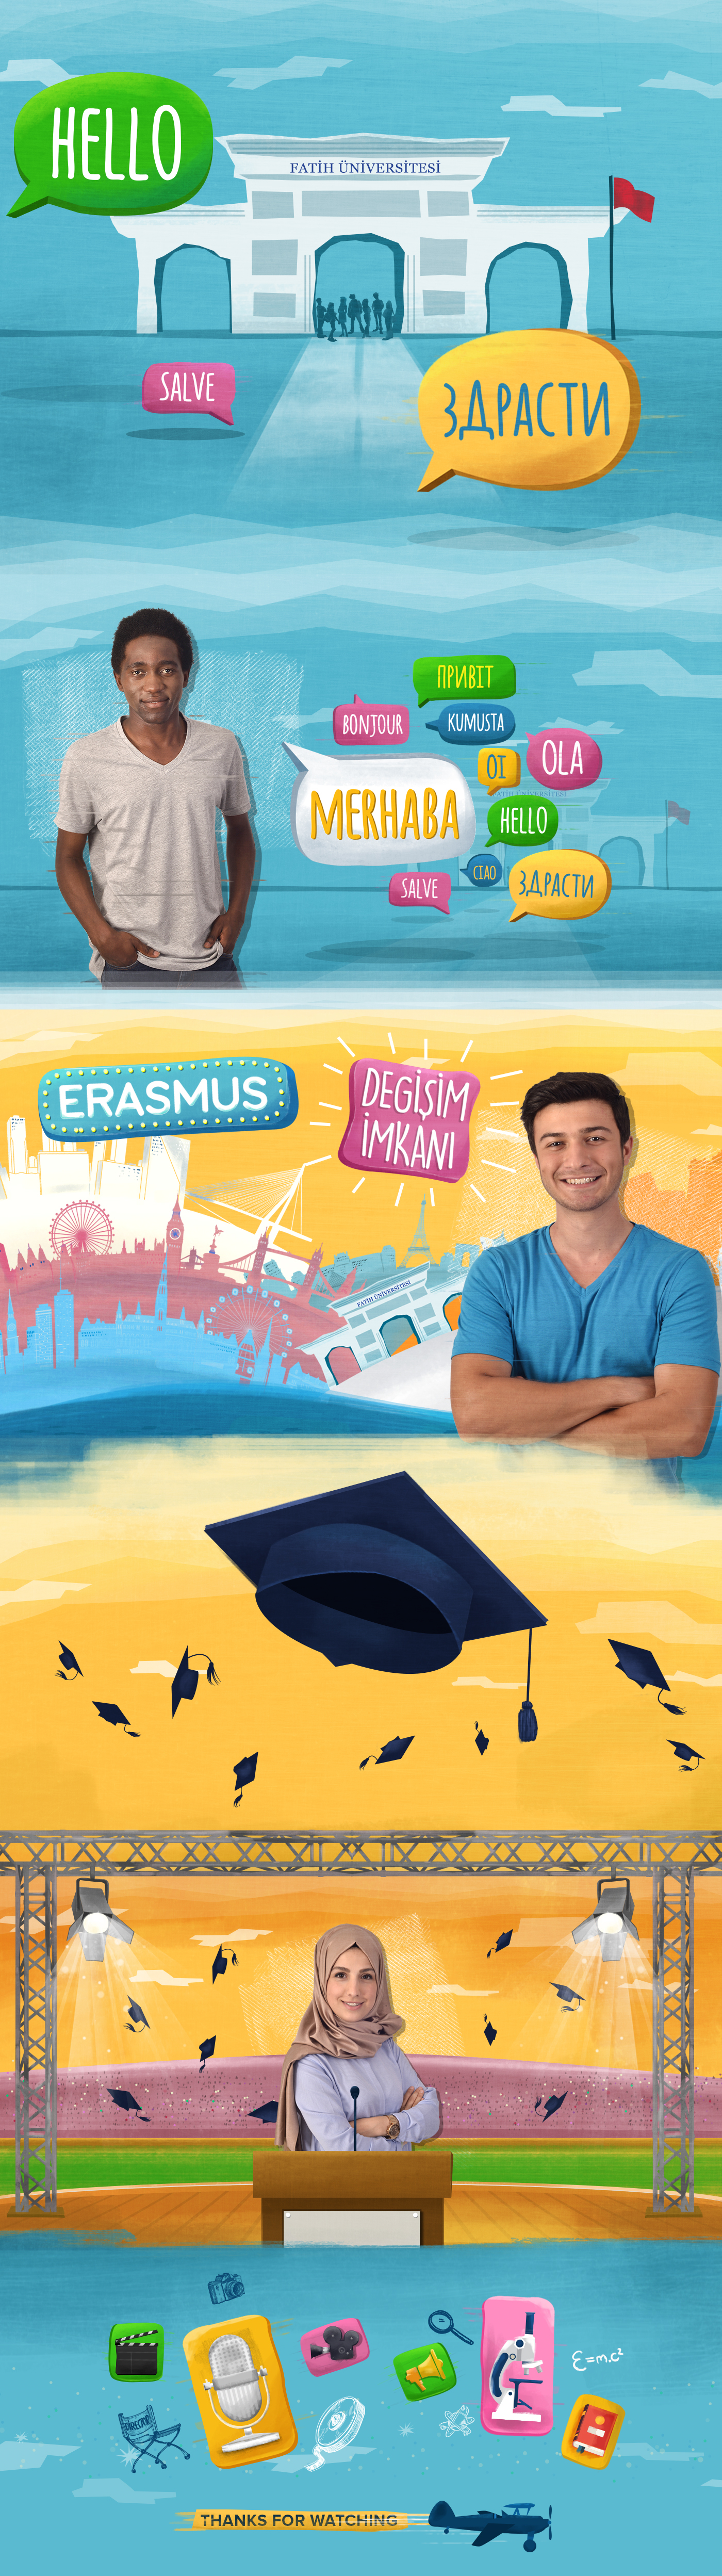 Fatih University tvc commercial Education brush erasmus Cities Silhouette student istanbul